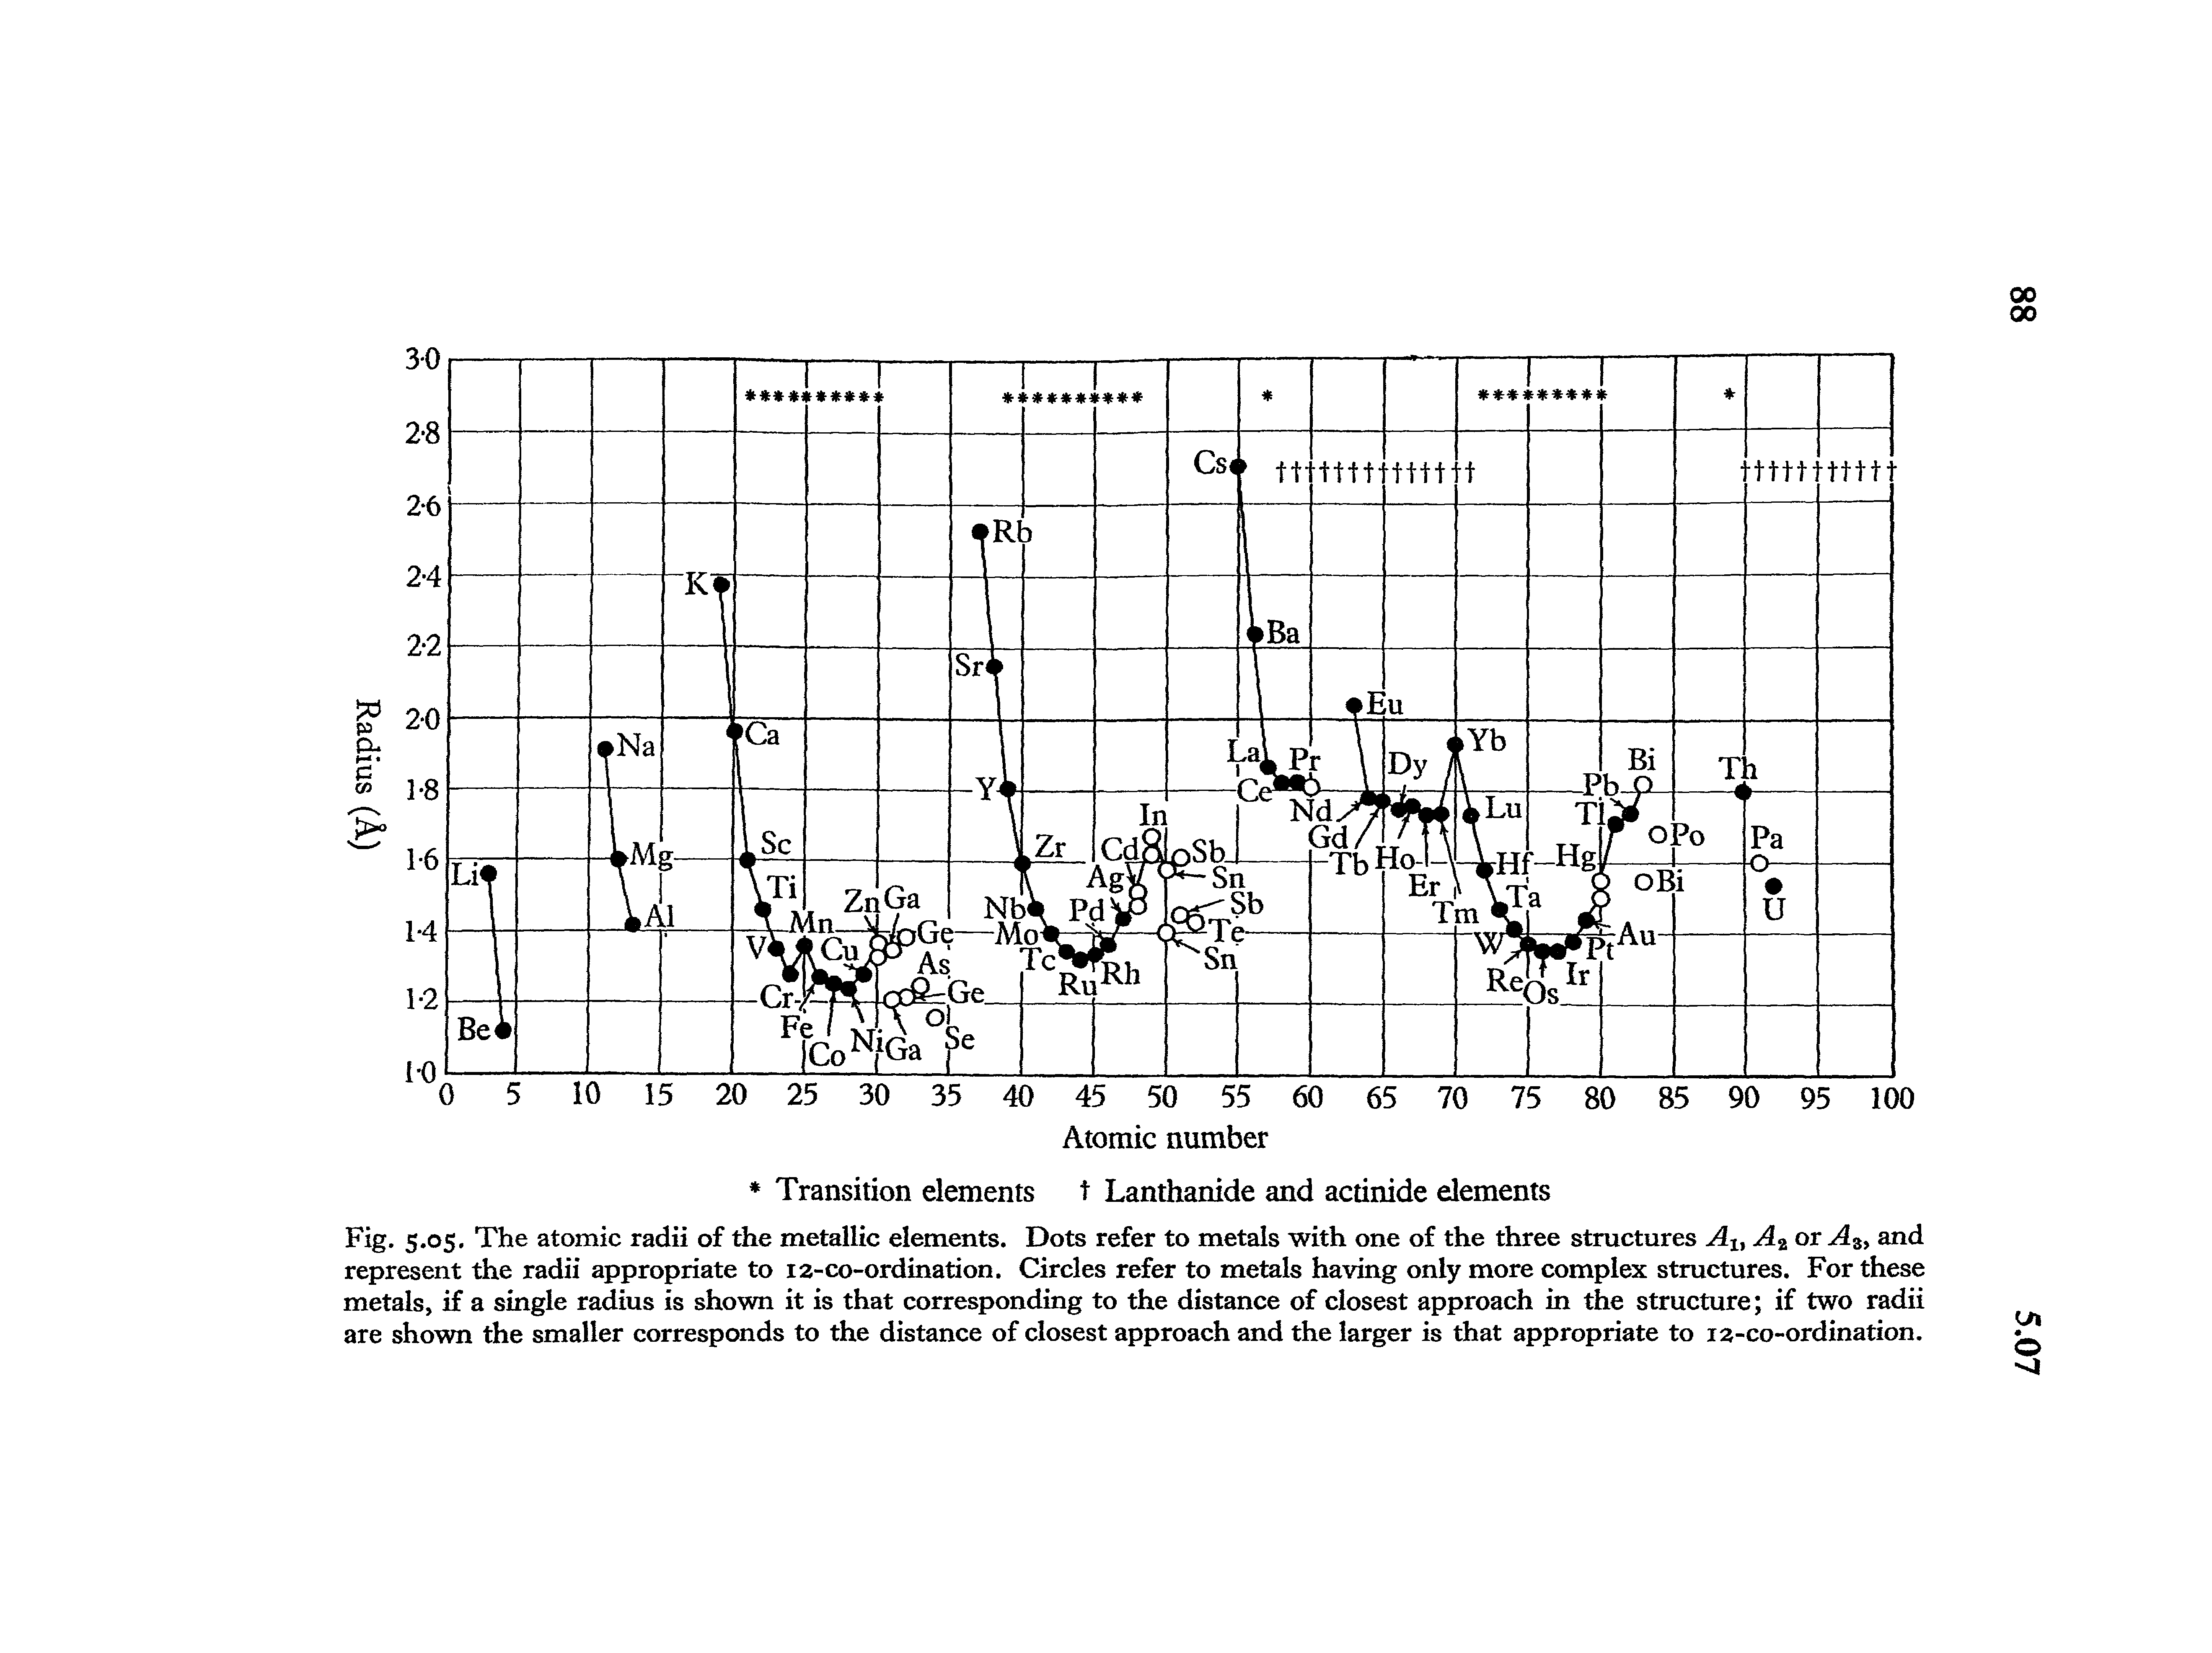 Fig. 5.05. The atomic radii of the metallic elements. Dots refer to metals with one of the three structures Alt A2 or A3, and represent the radii appropriate to 12-co-ordination. Circles refer to metals having only more complex structures. For these metals, if a single radius is shown it is that corresponding to the distance of closest approach in the structure if two radii are shown the smaller corresponds to the distance of closest approach and the larger is that appropriate to 12-co-ordination.